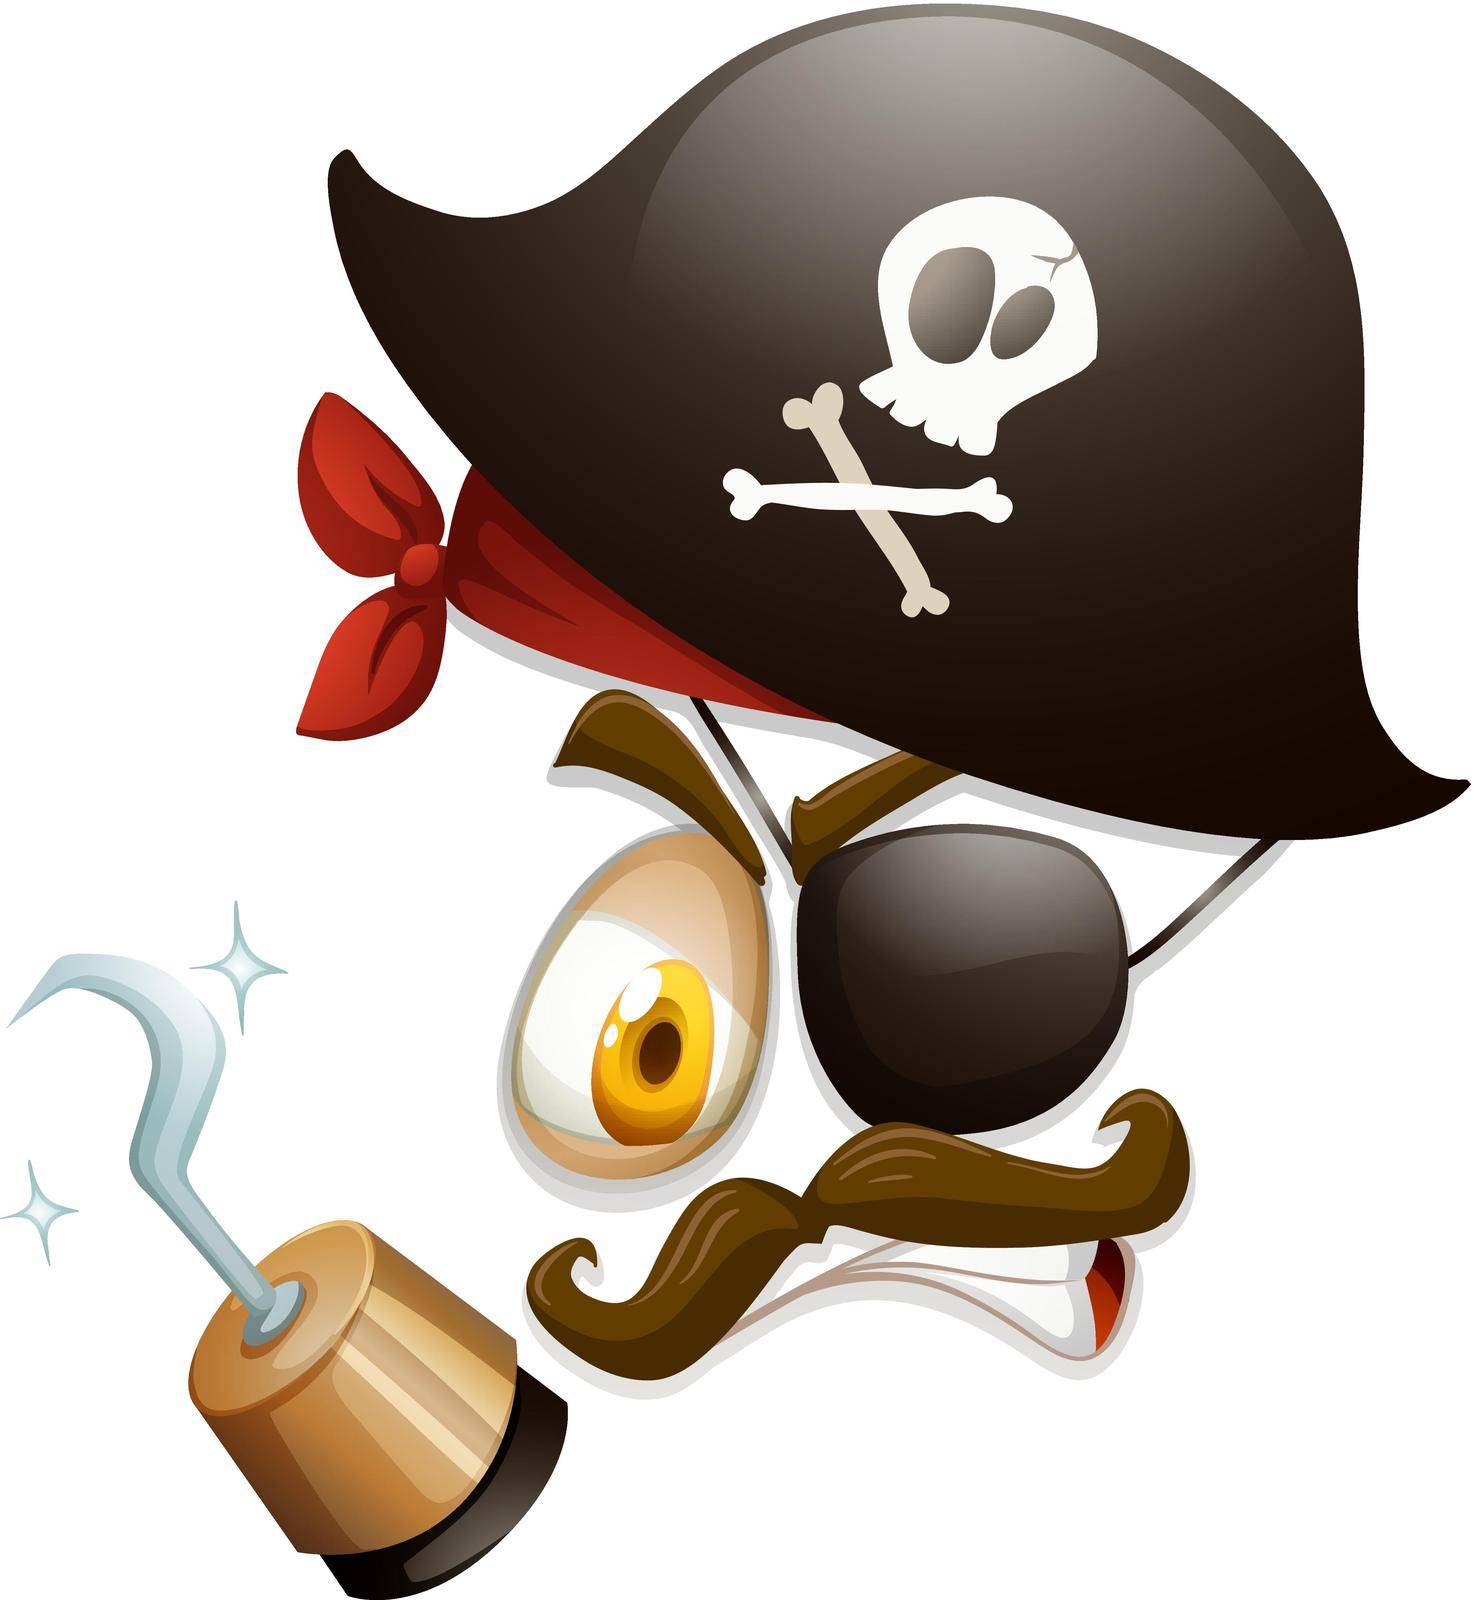 Facial expression with pirate hat illustration